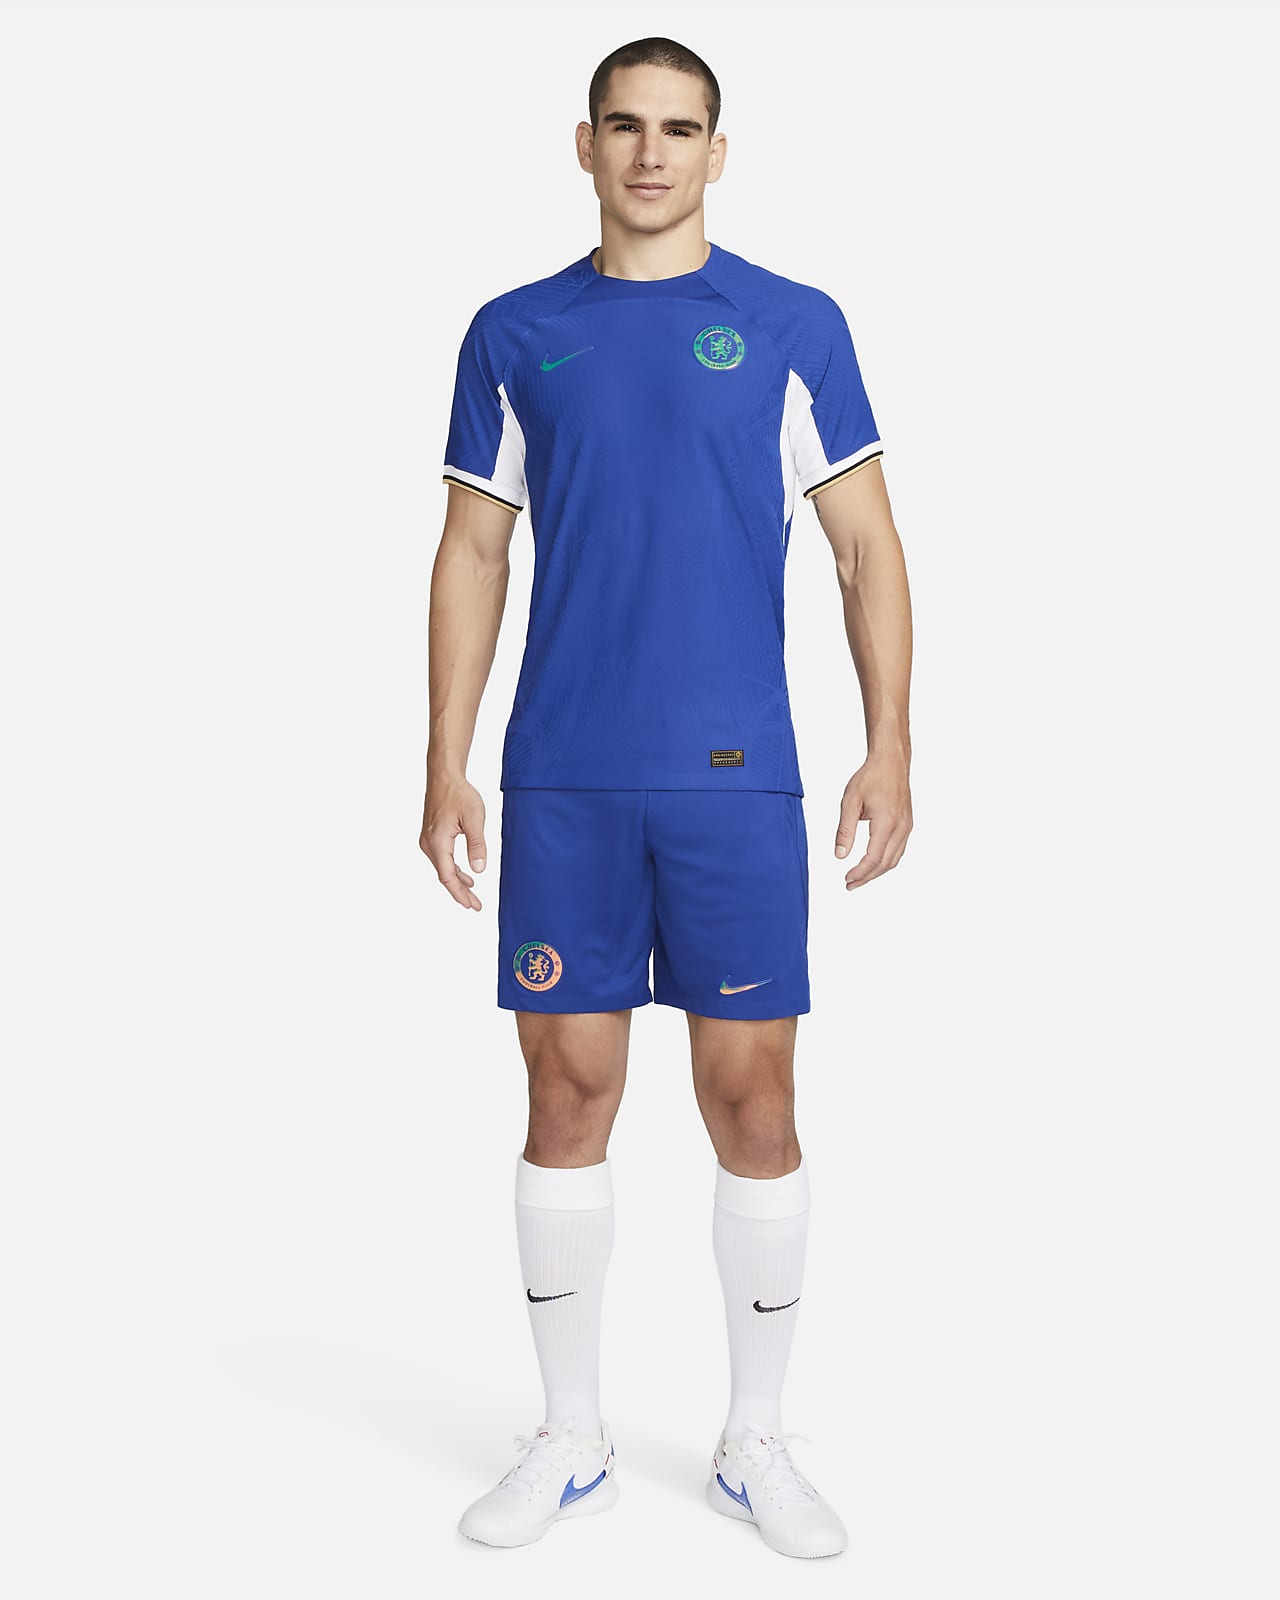 2023/2024 Nike Chelsea Home Jersey